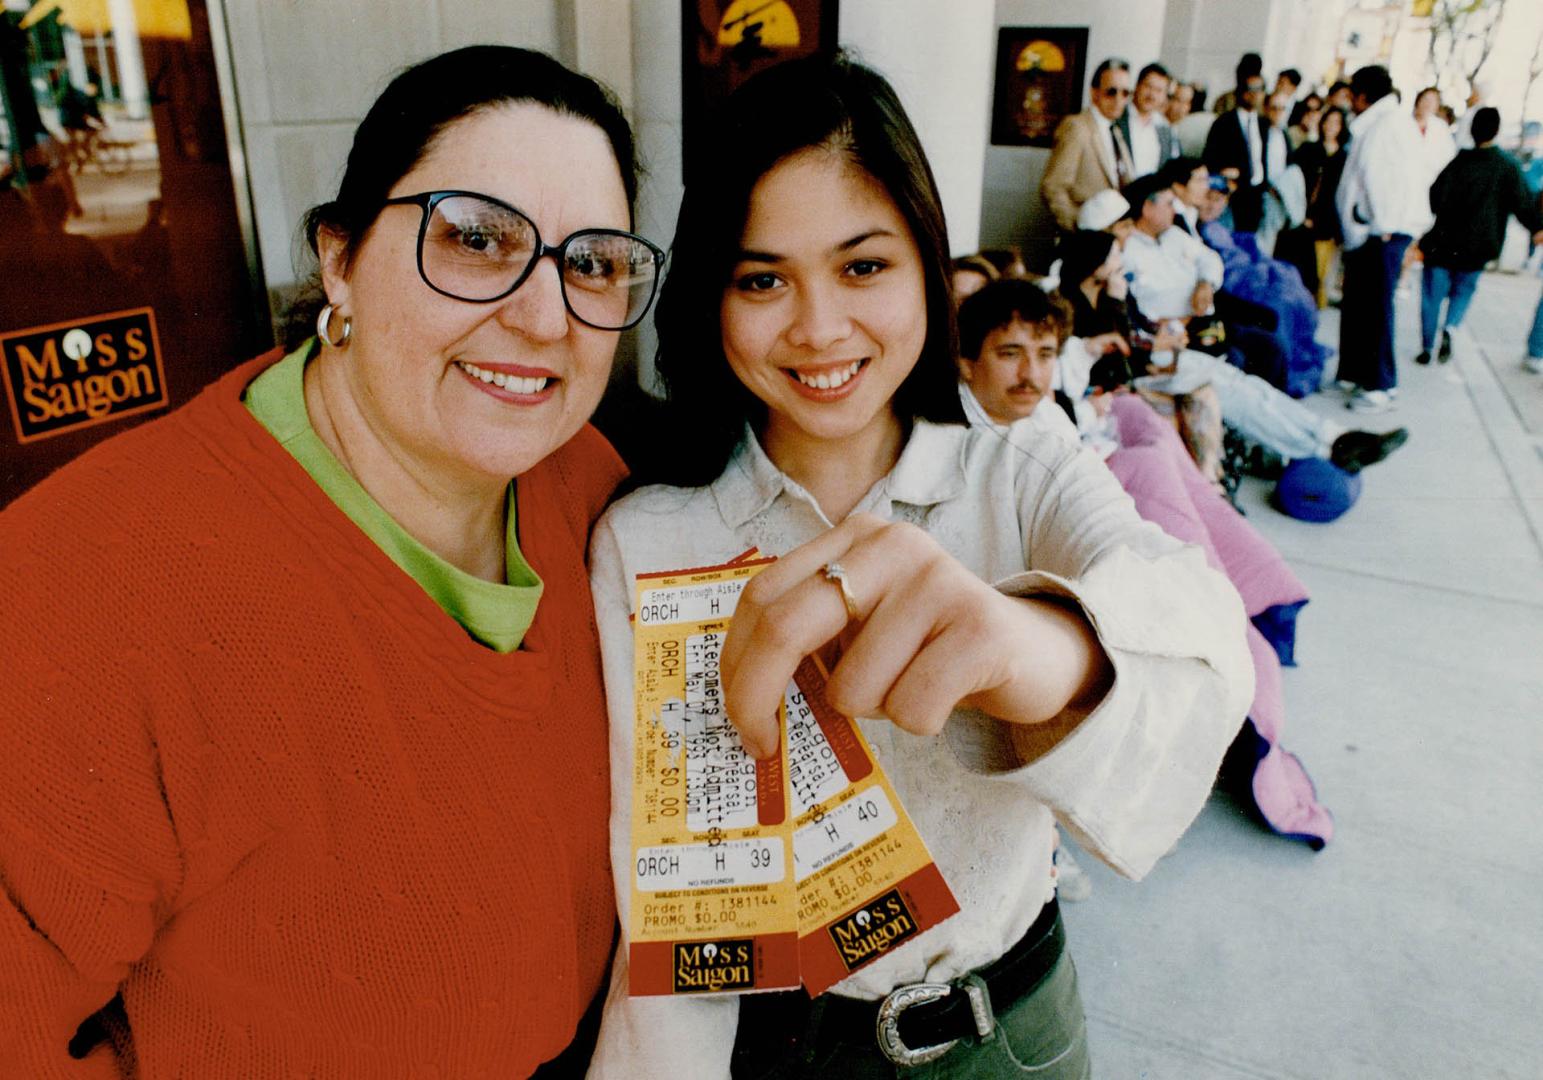 Diane Harris-Wakeling of Aurora gets a preview of her own yesterday when she meets Miss Saigon, Ma-Anne Dionisio of Winnipeg. Harris-Wakeling was the (...)